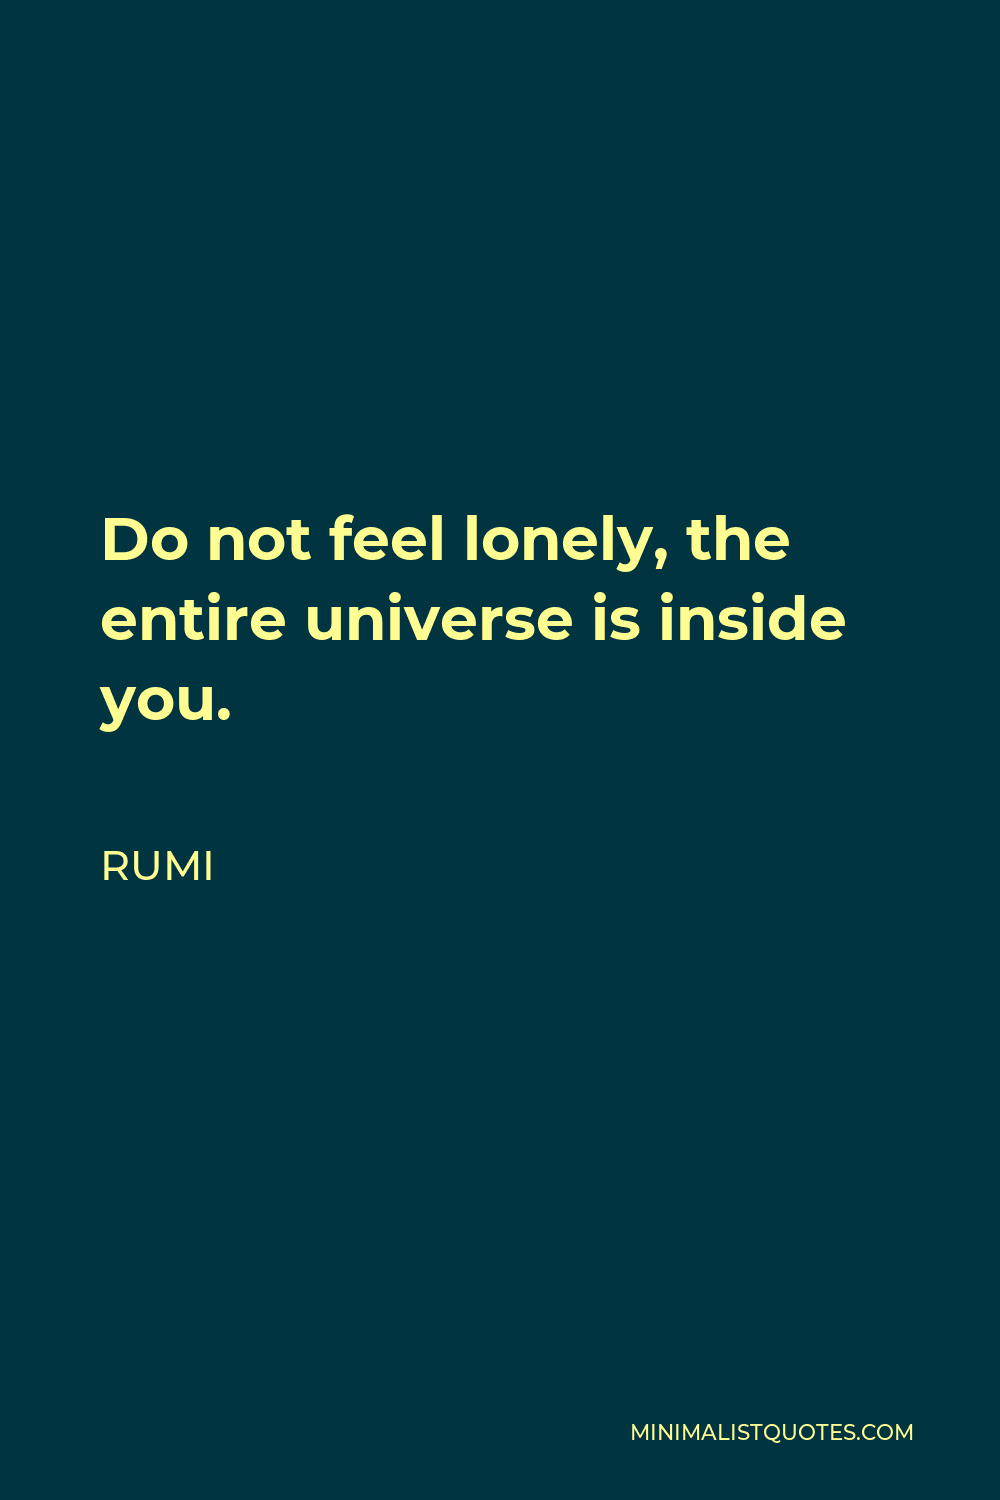 Rumi Quote - Do not feel lonely, the entire universe is inside you.